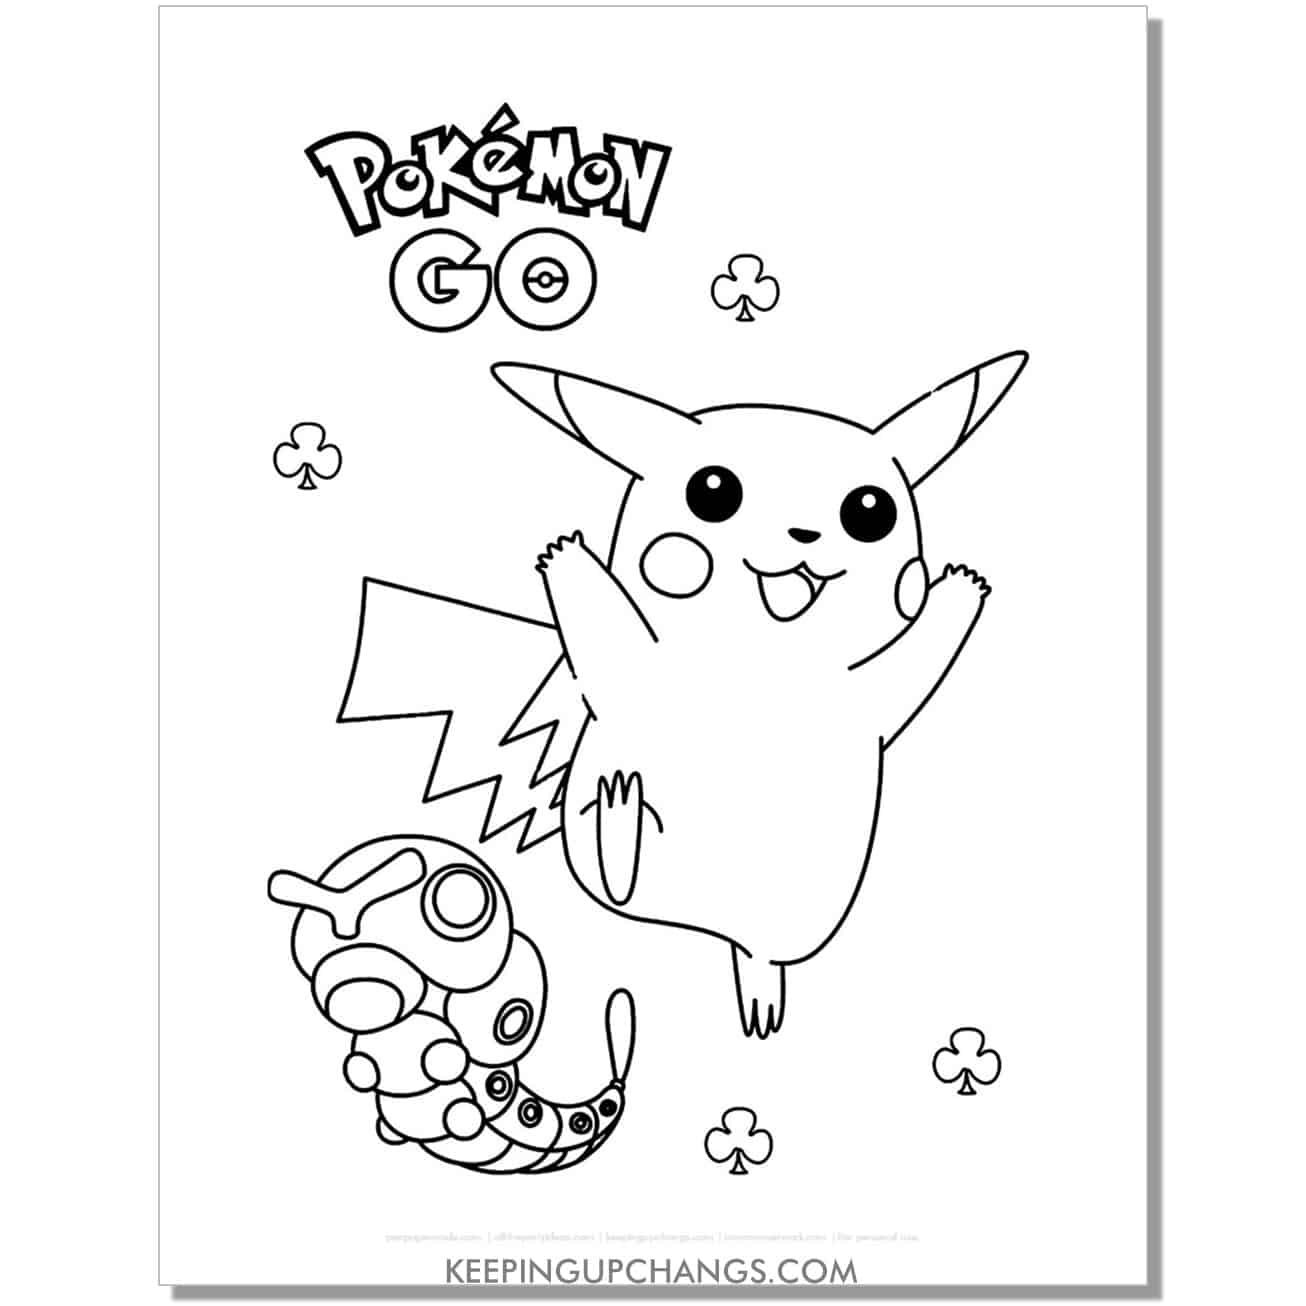 pikachu caterpie pokemon go coloring page, sheet.